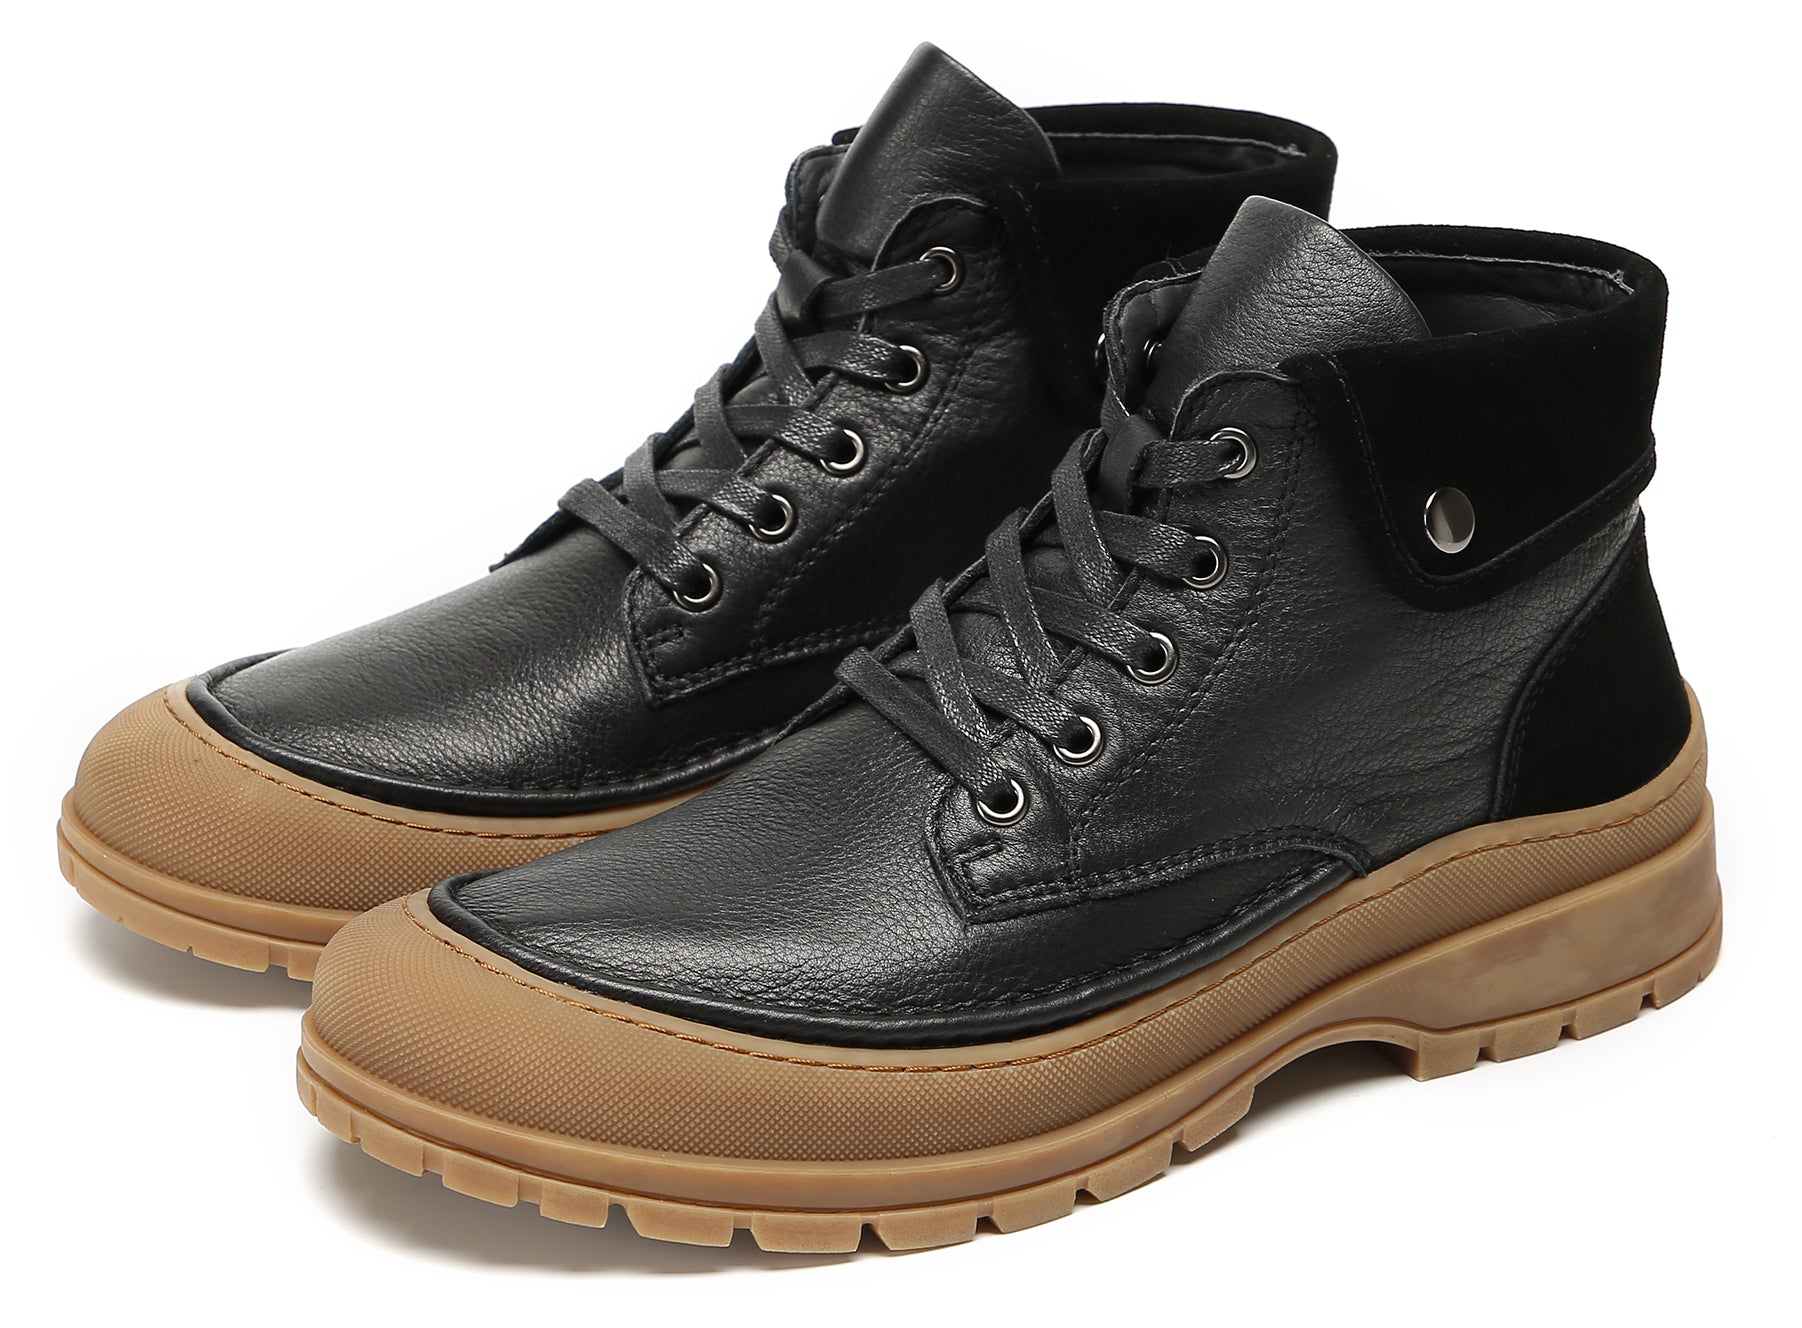 Men's Casual  Mid Top Sneaker Oxford Boots